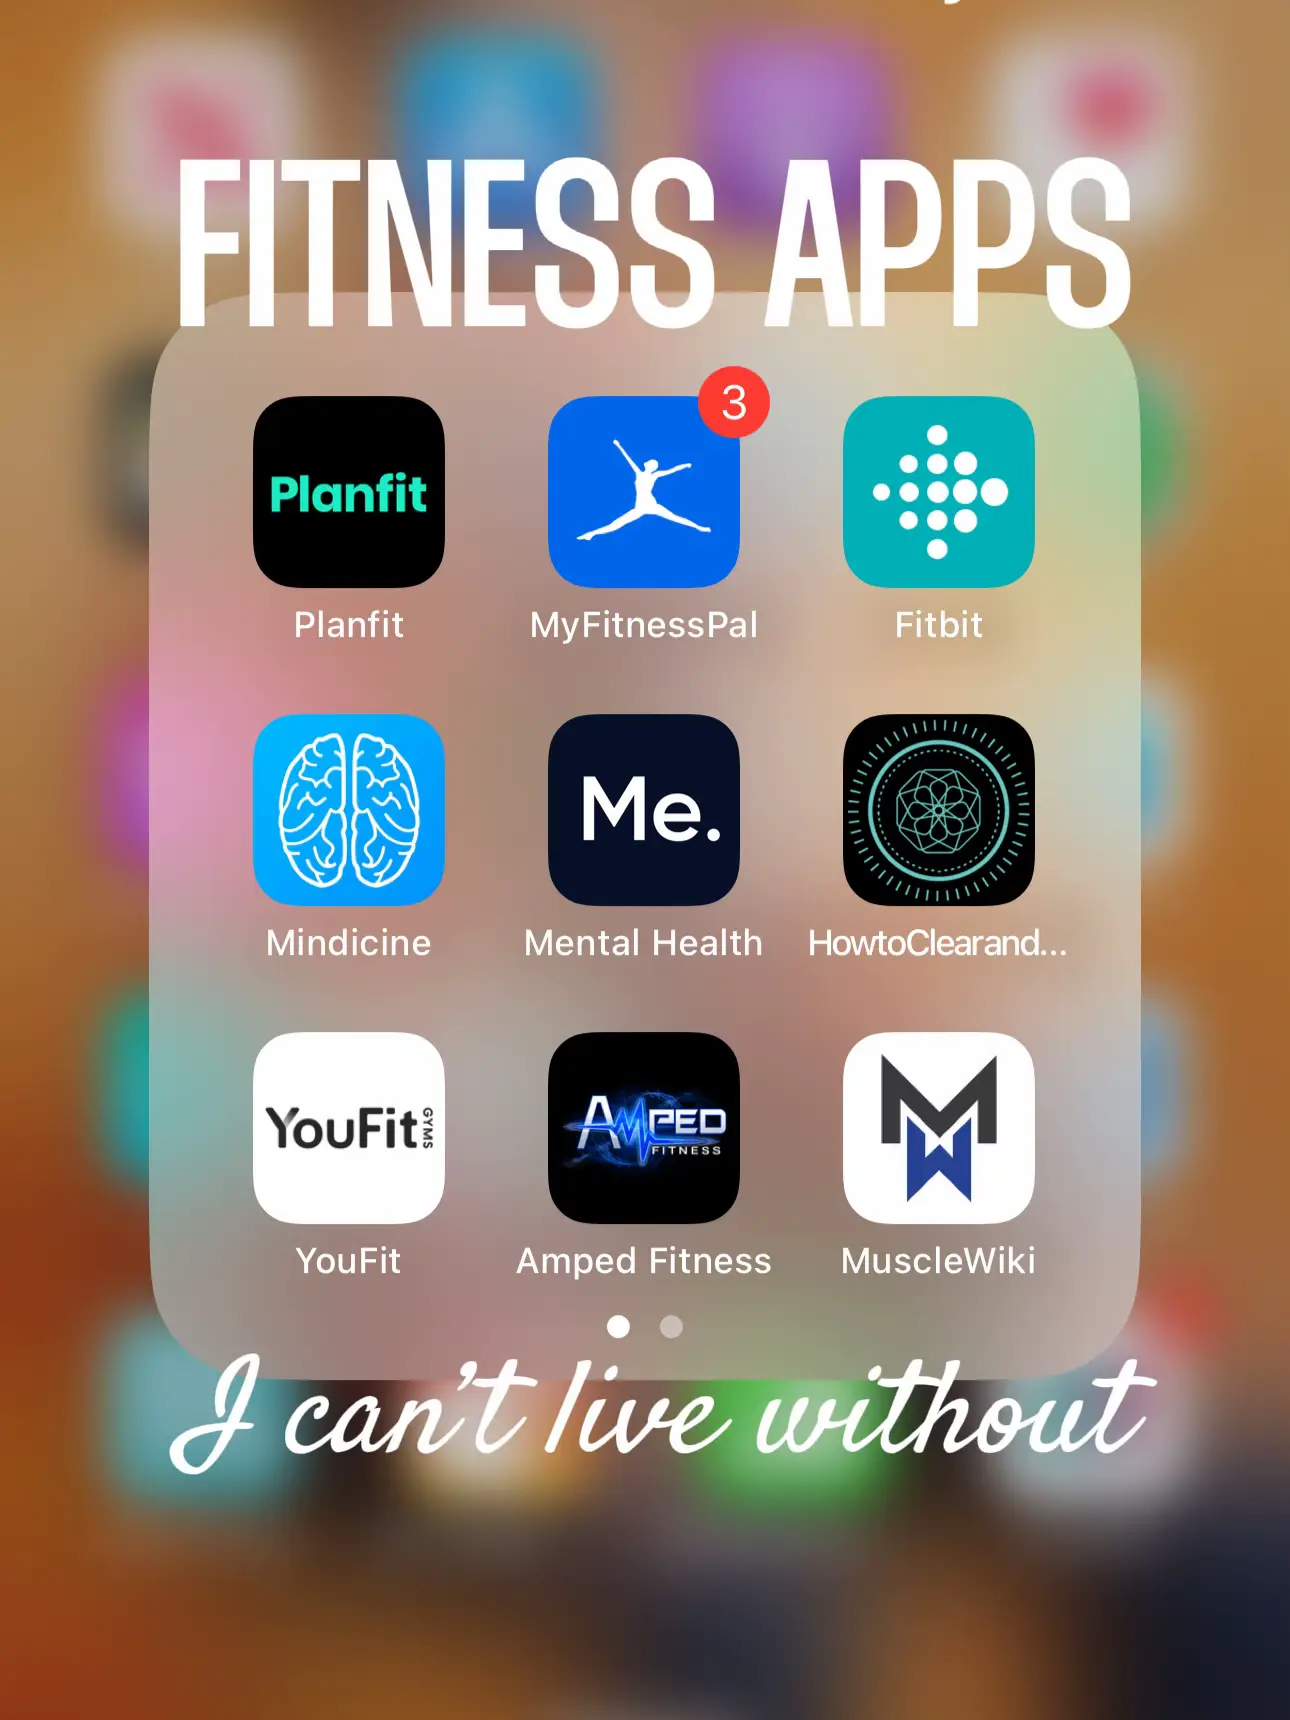 ClassPass Blog - Page 2 of 58 - The One App for All Things Fitness